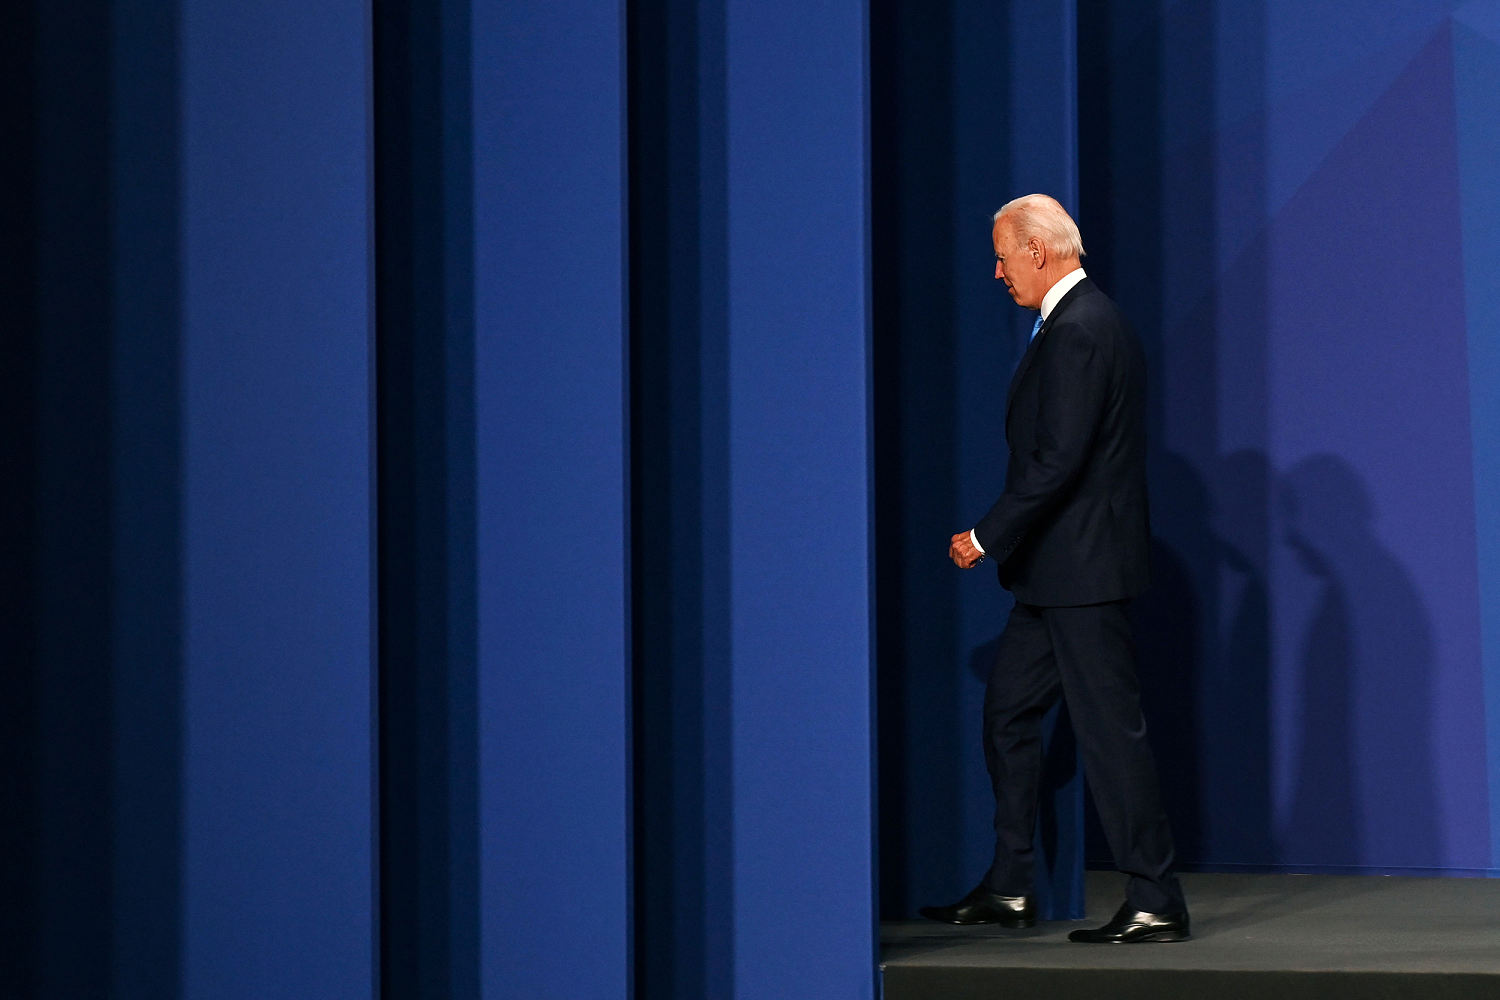 Biden suggests to allies he might limit evening events to get more sleep